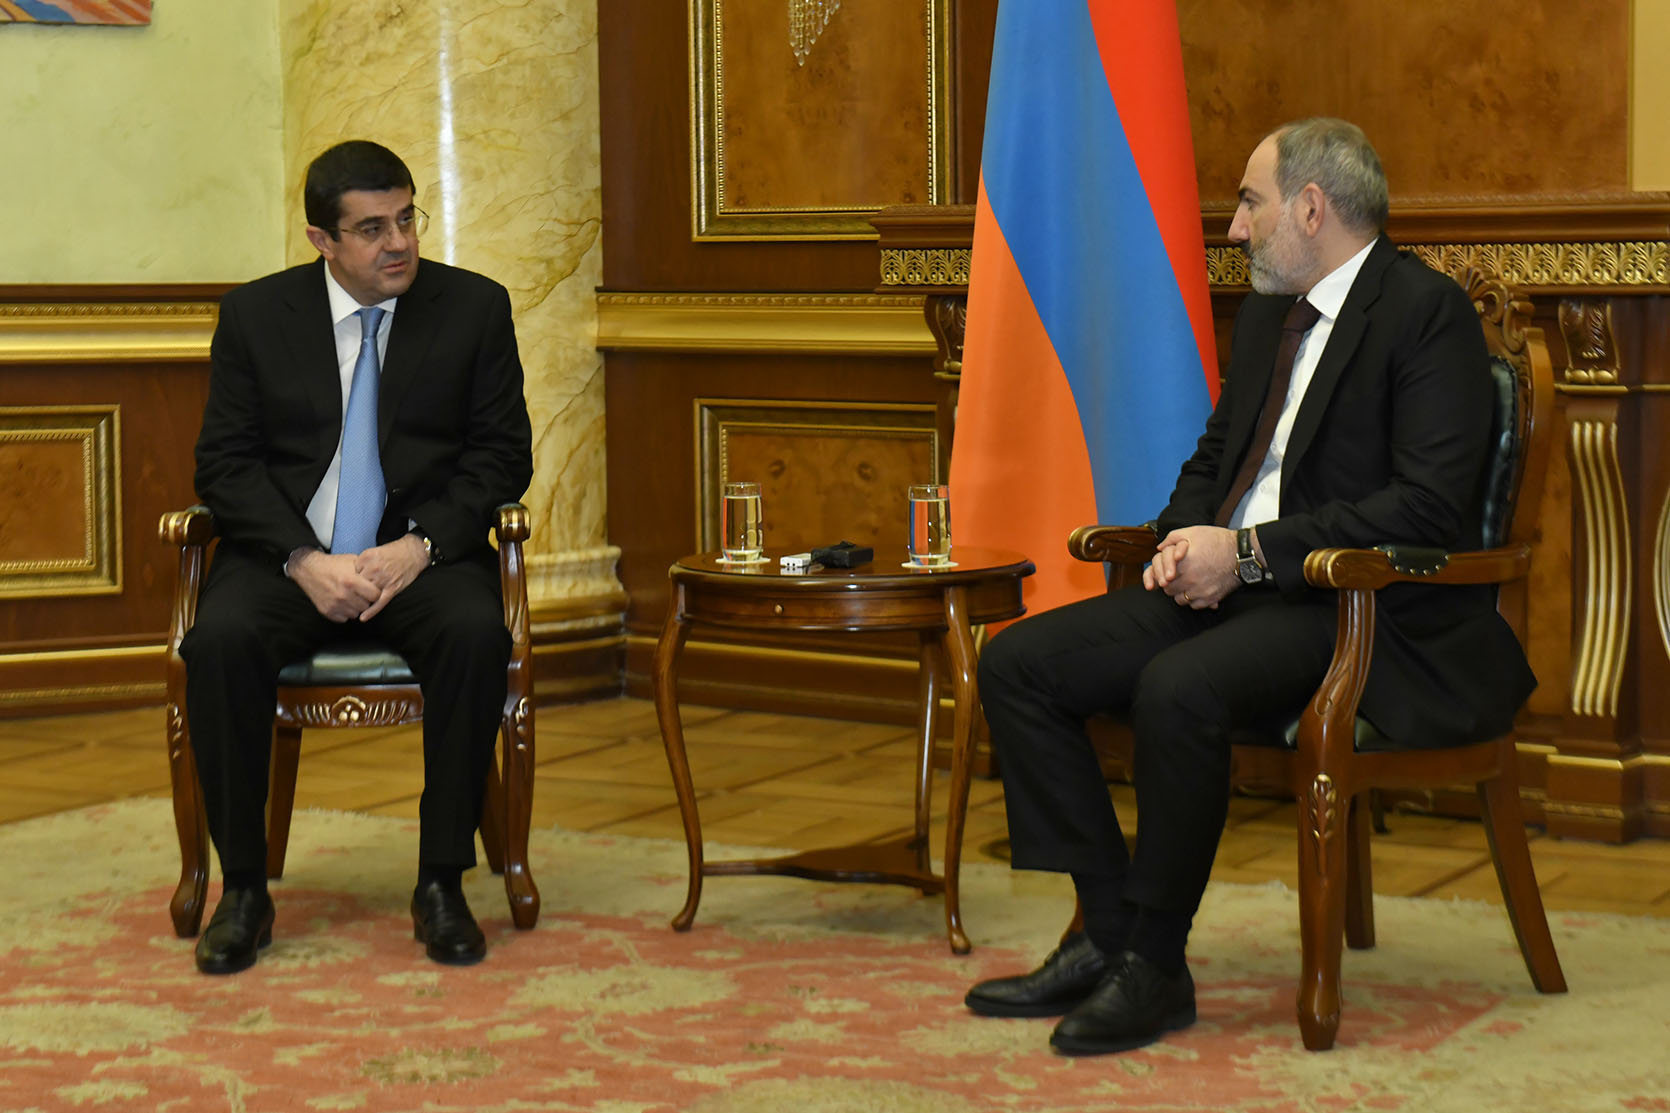 We must concentrate our forces to restore normal life in Artsakh. the meeting of the Prime Minister of Armenia and the President of the Republic of Artsakh took place